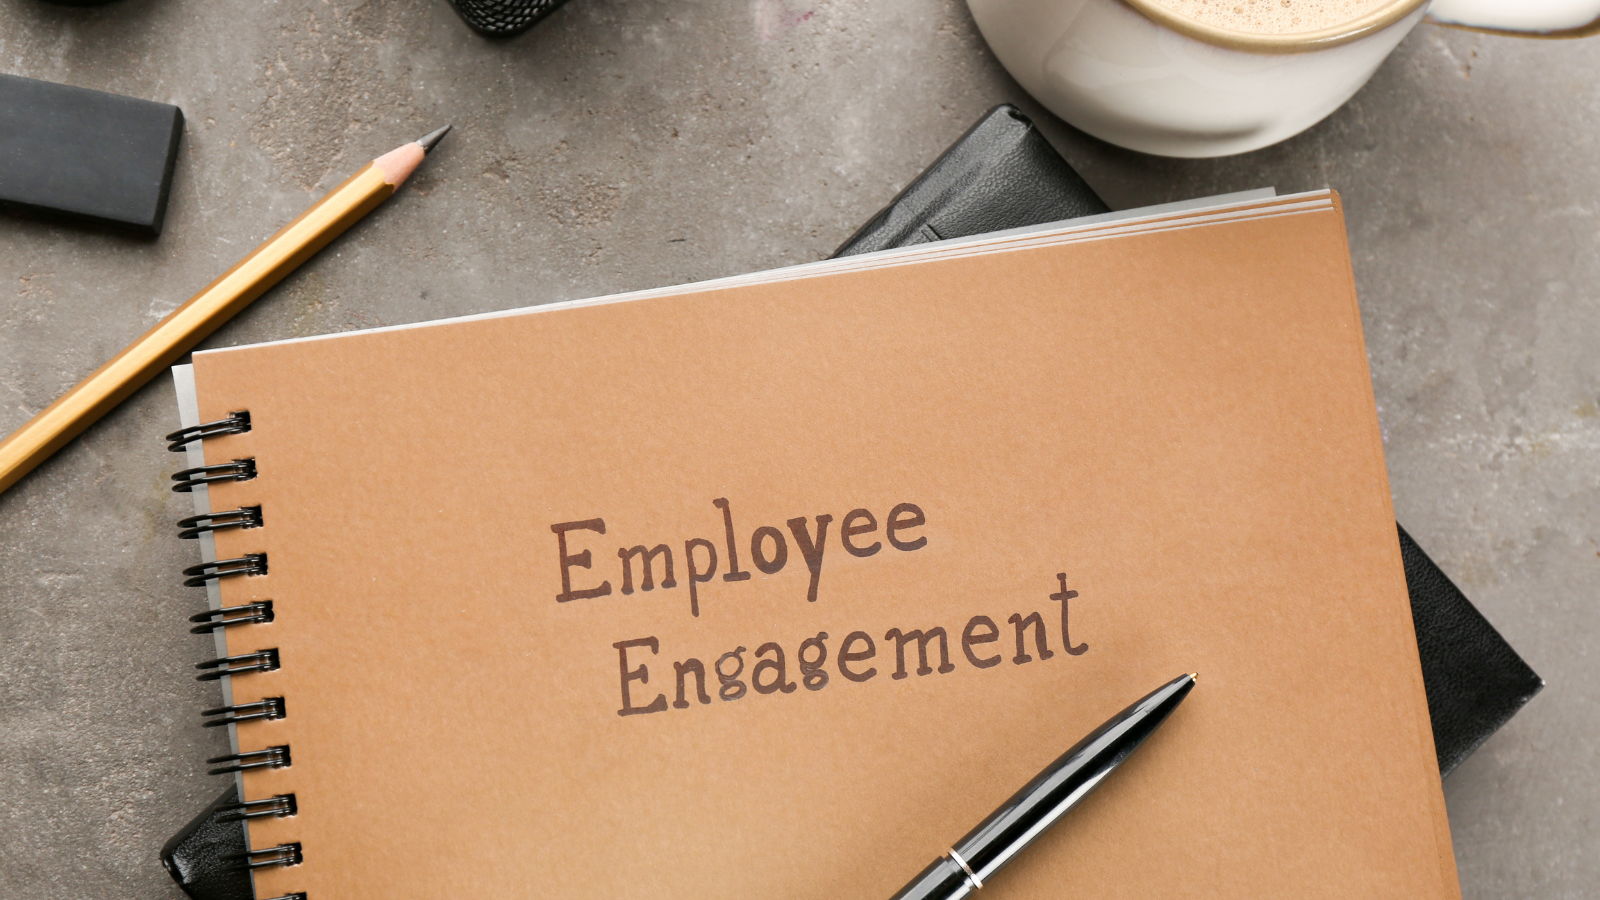 How Can Employee Engagement Benefit the Company?